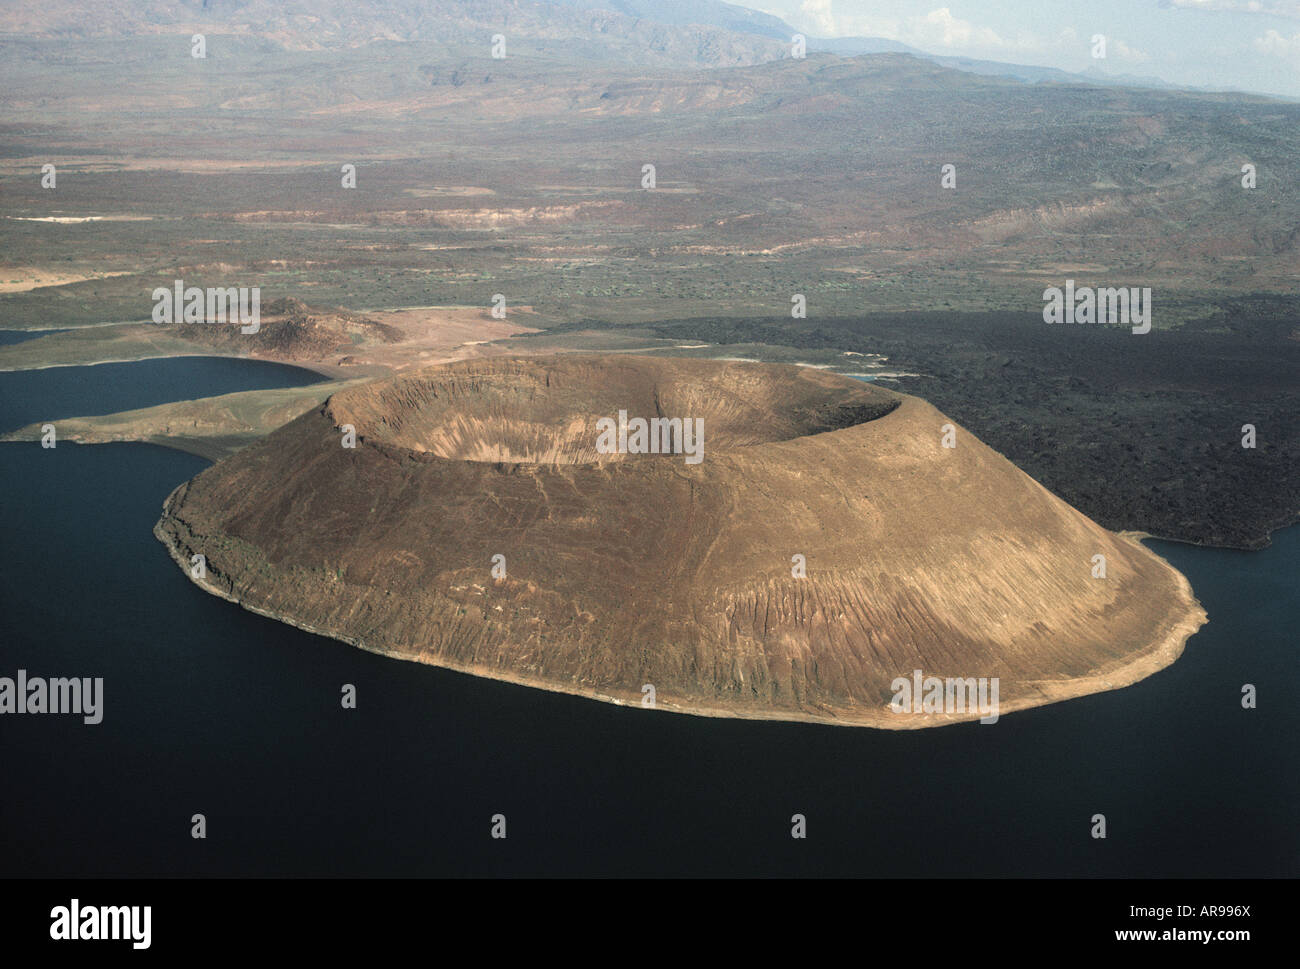 Aerial view of Nabuyatom volcanic cone at the southern end of Lake Turkana northern Kenya East Africa Stock Photo